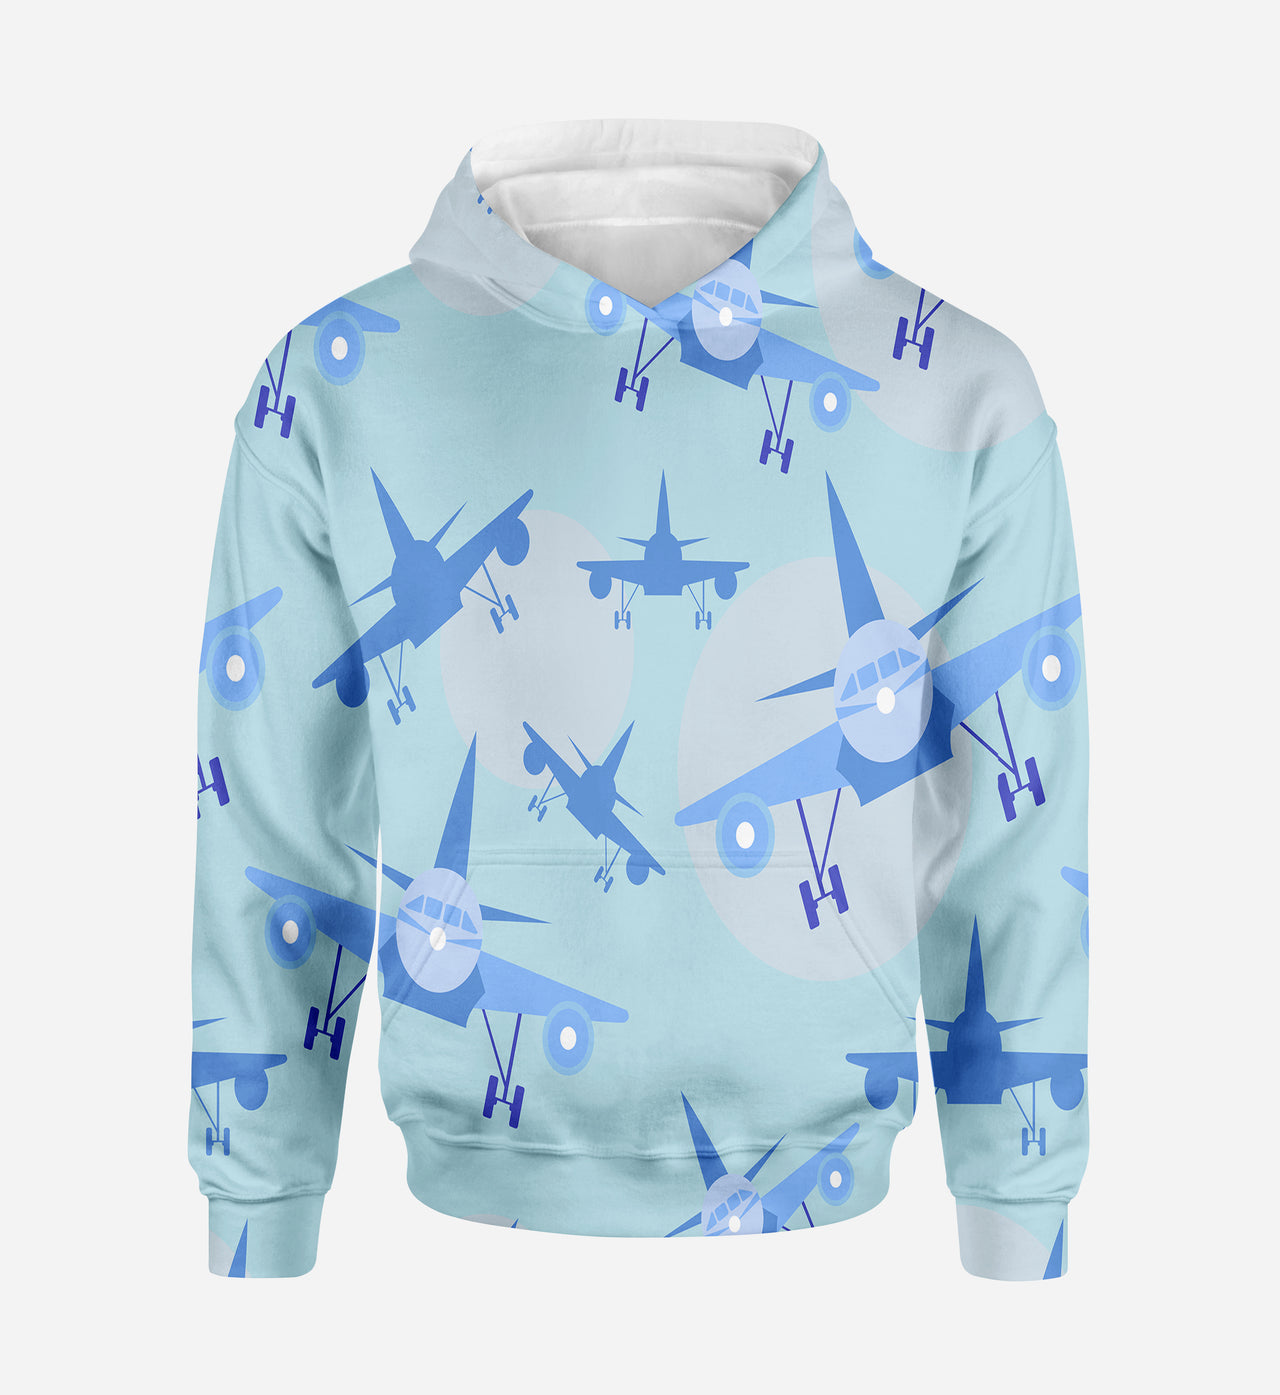 Super Funny Airplanes Designed 3D Hoodies